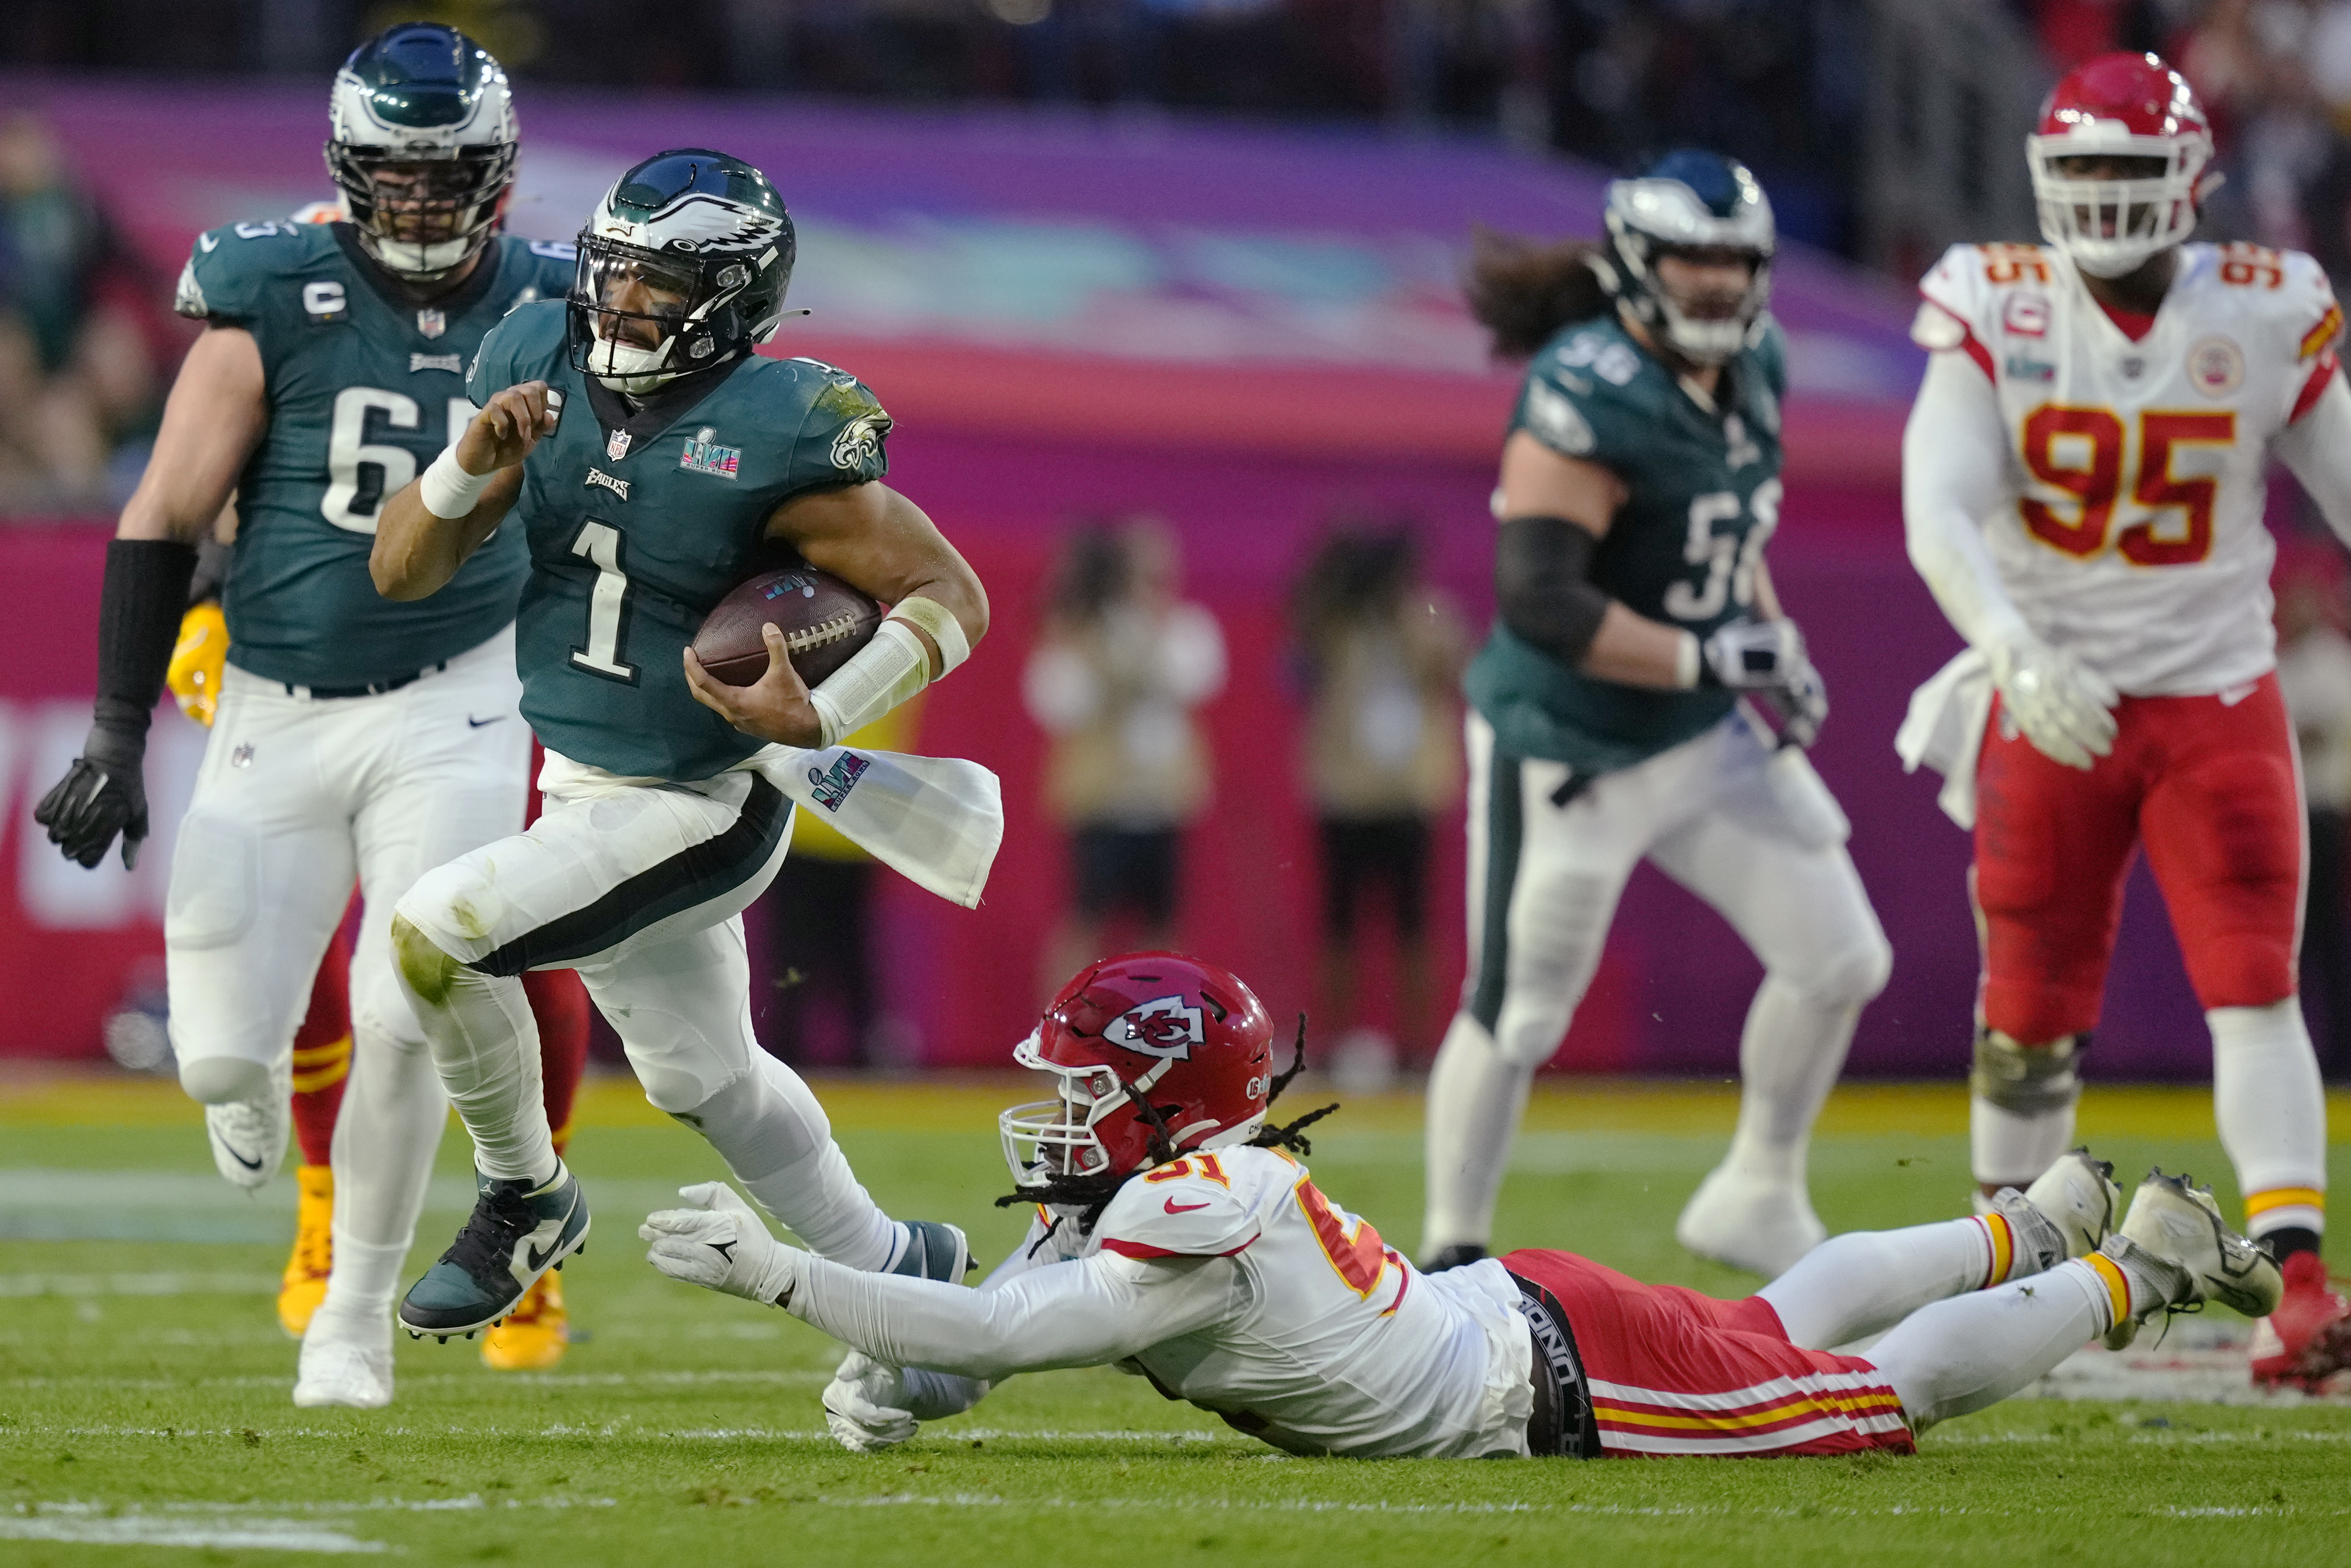 Philly special': Pederson's bold calls key to Eagles Super Bowl 52 win